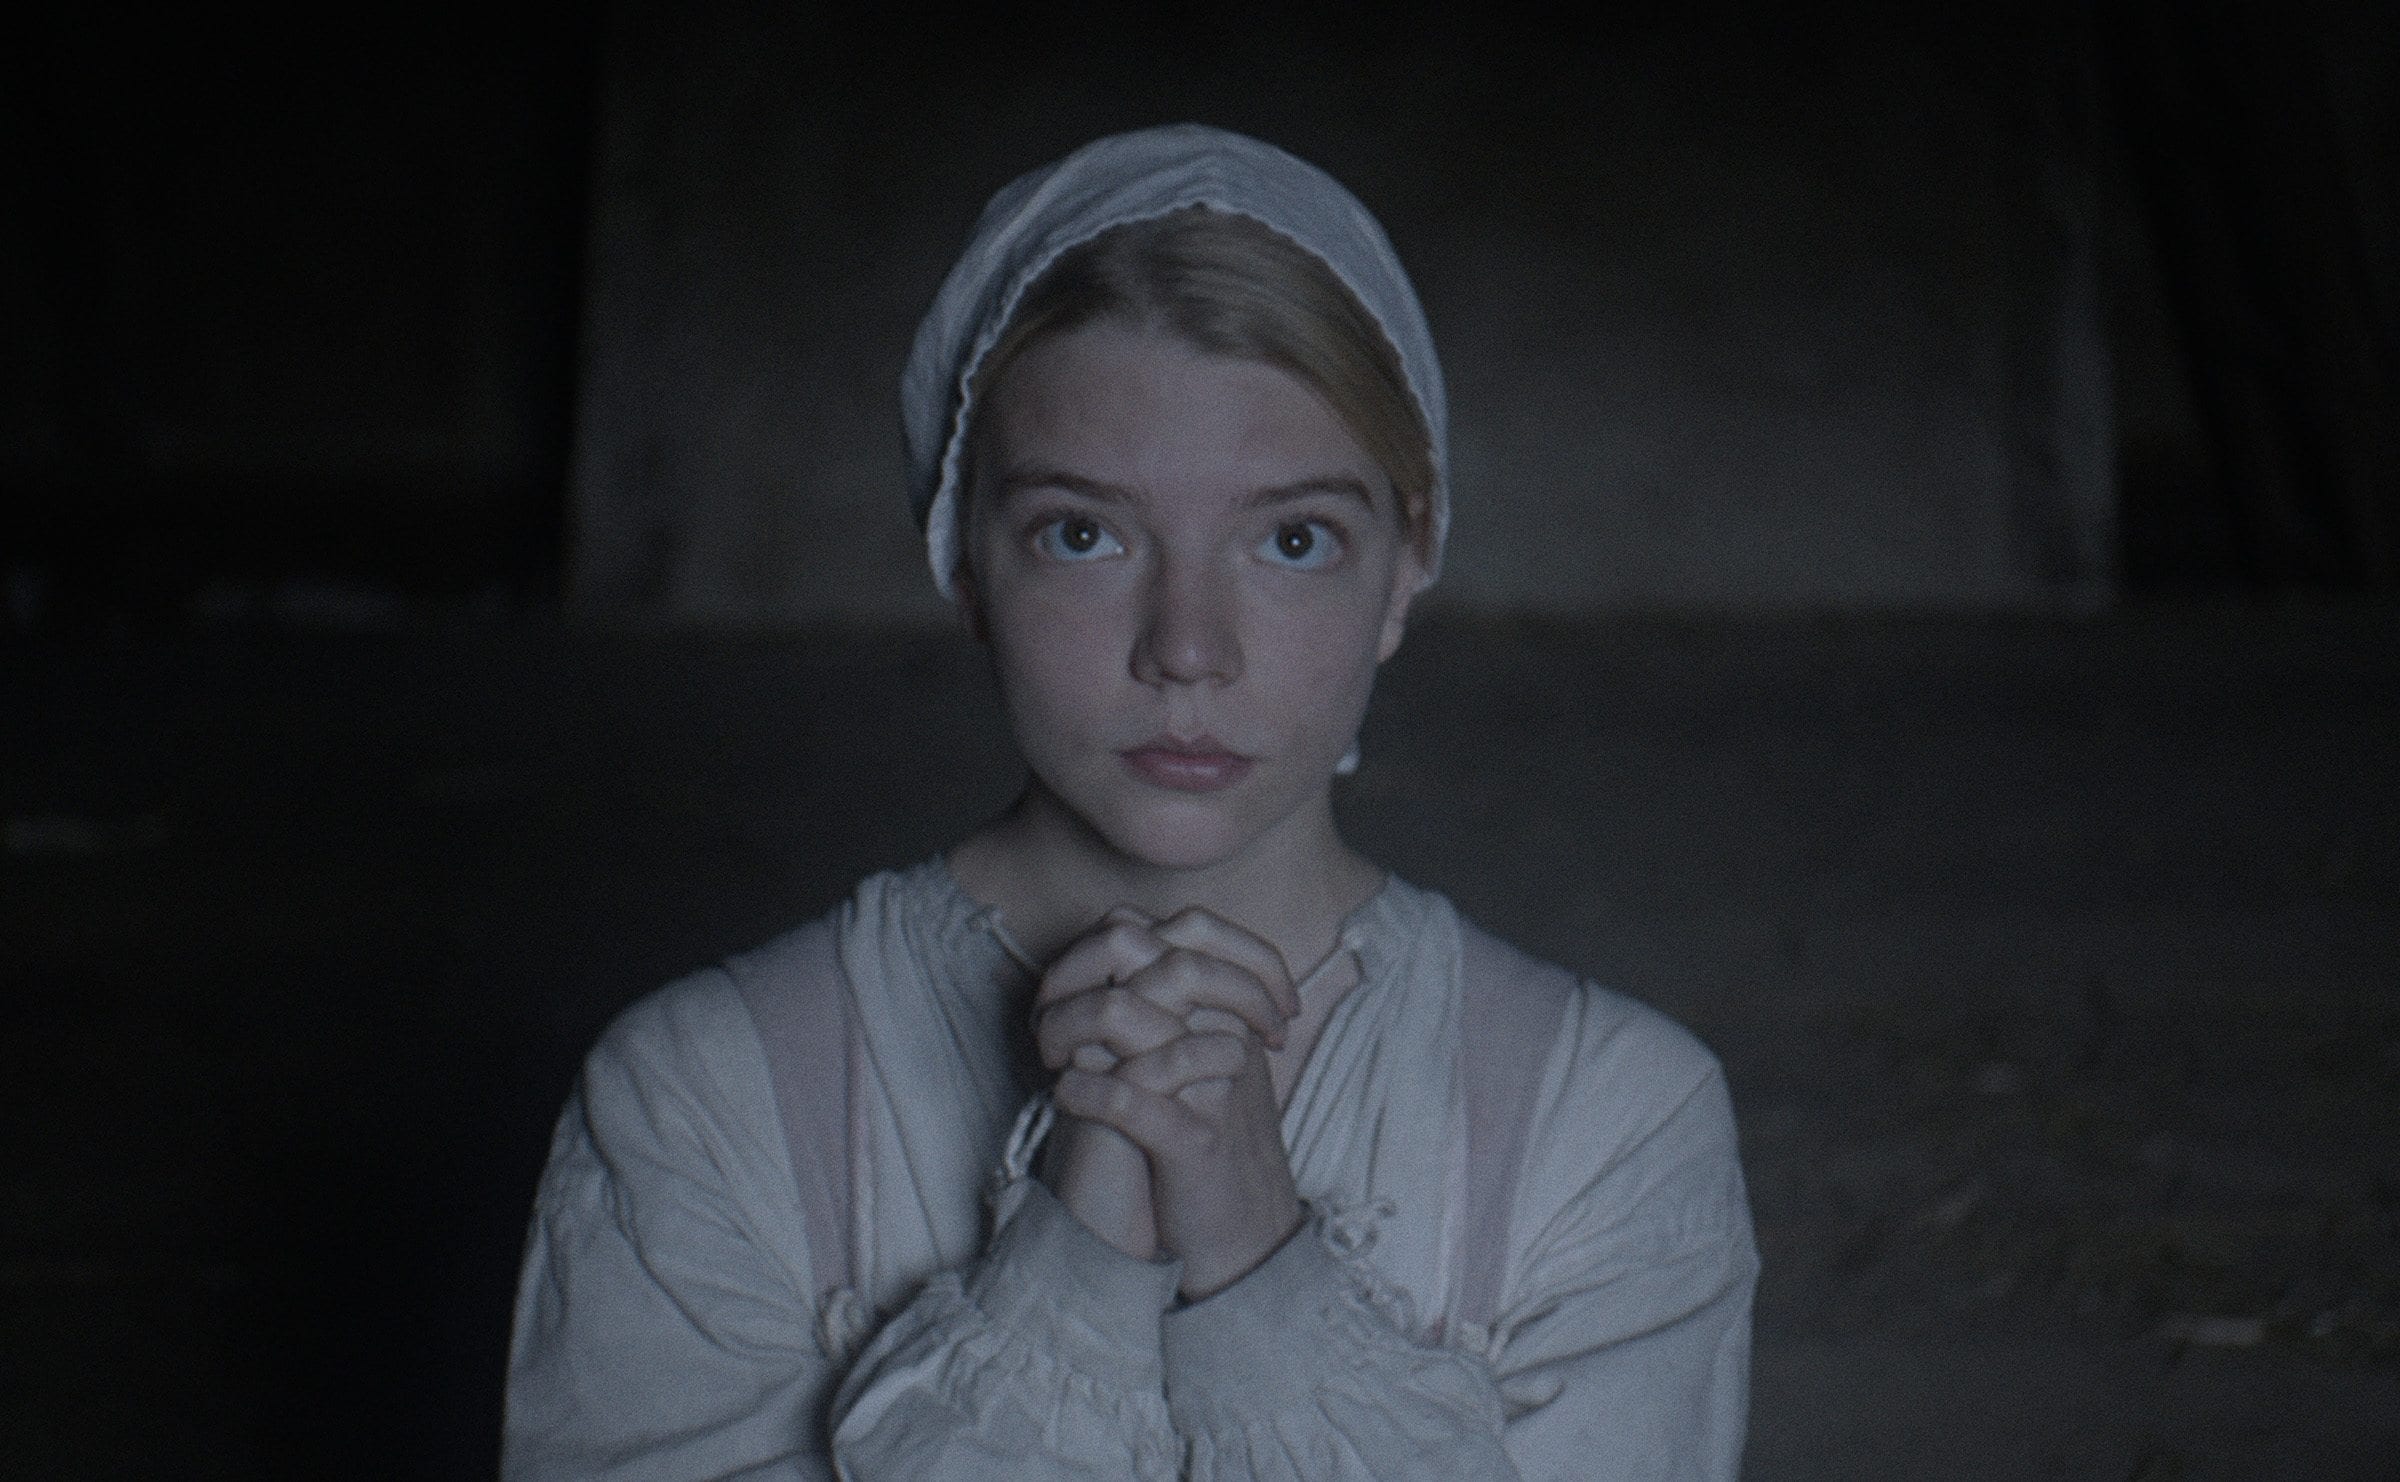 The director and writer of ‘The Witch’, Robert Eggers and actress Anya Taylor-Joy are set to reunite for a remake of ‘Nosferatu’.